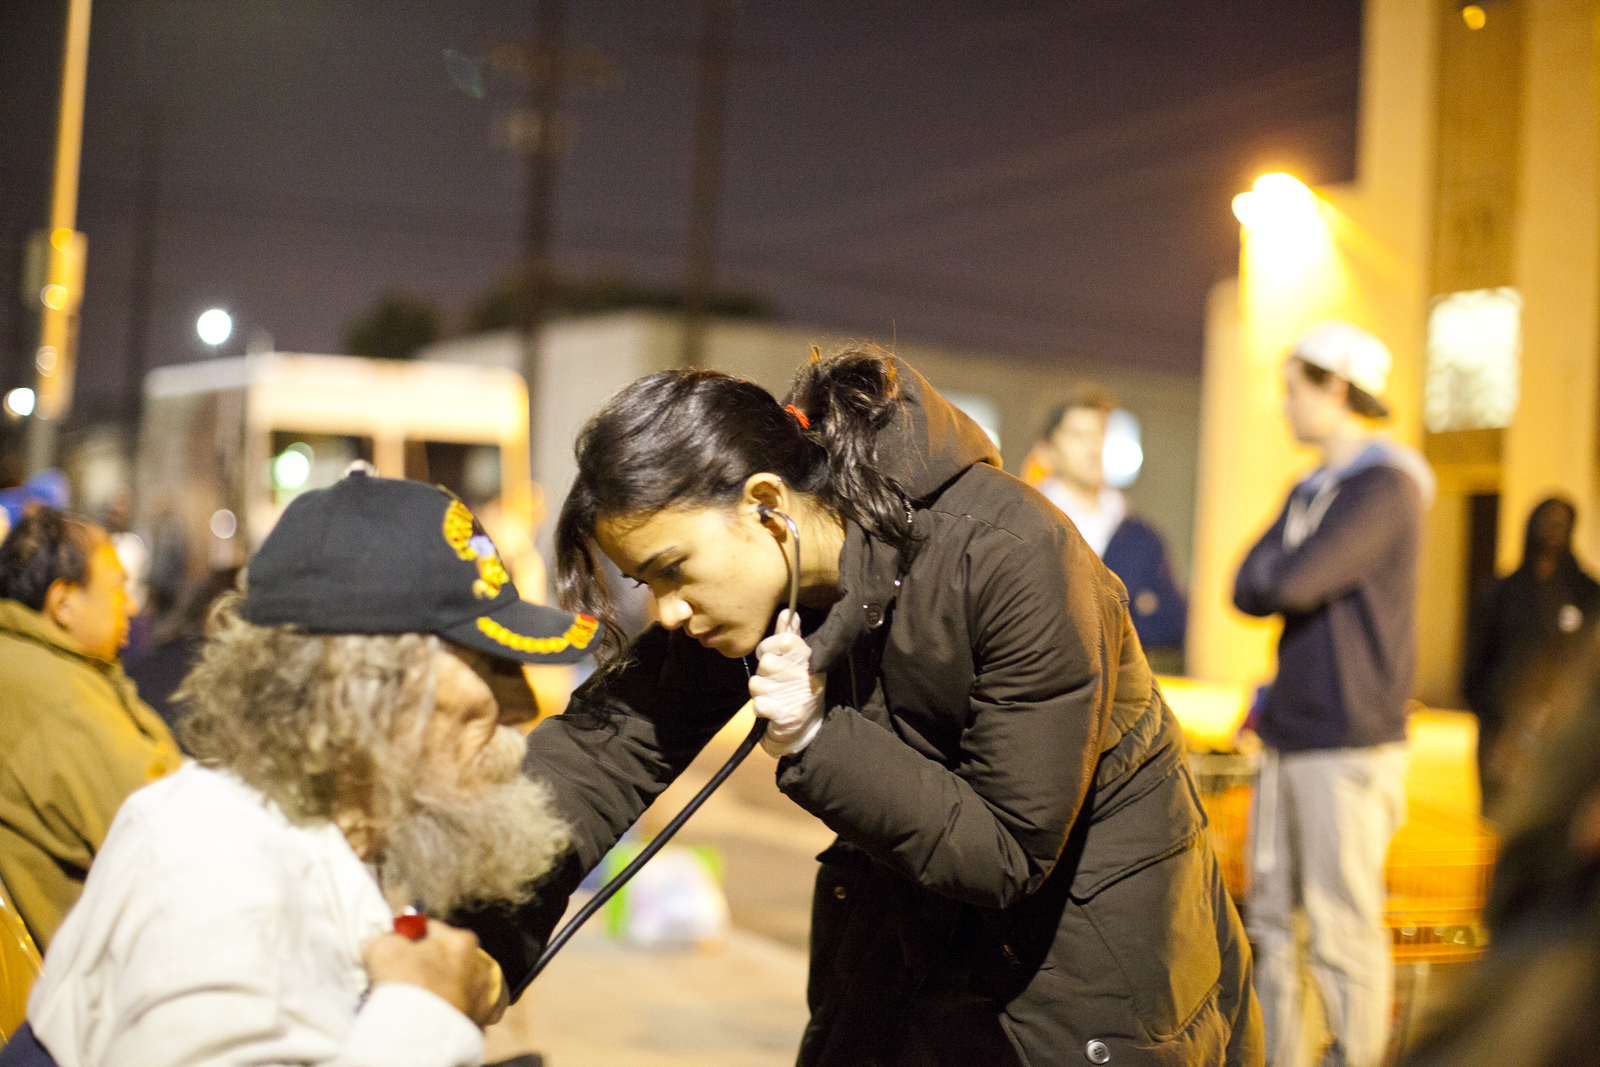 A student wearing a puffy coat uses a stethoscope to examine a gentleman with unkempt hair and beared wearing a military veterans hat, outdoors at night.